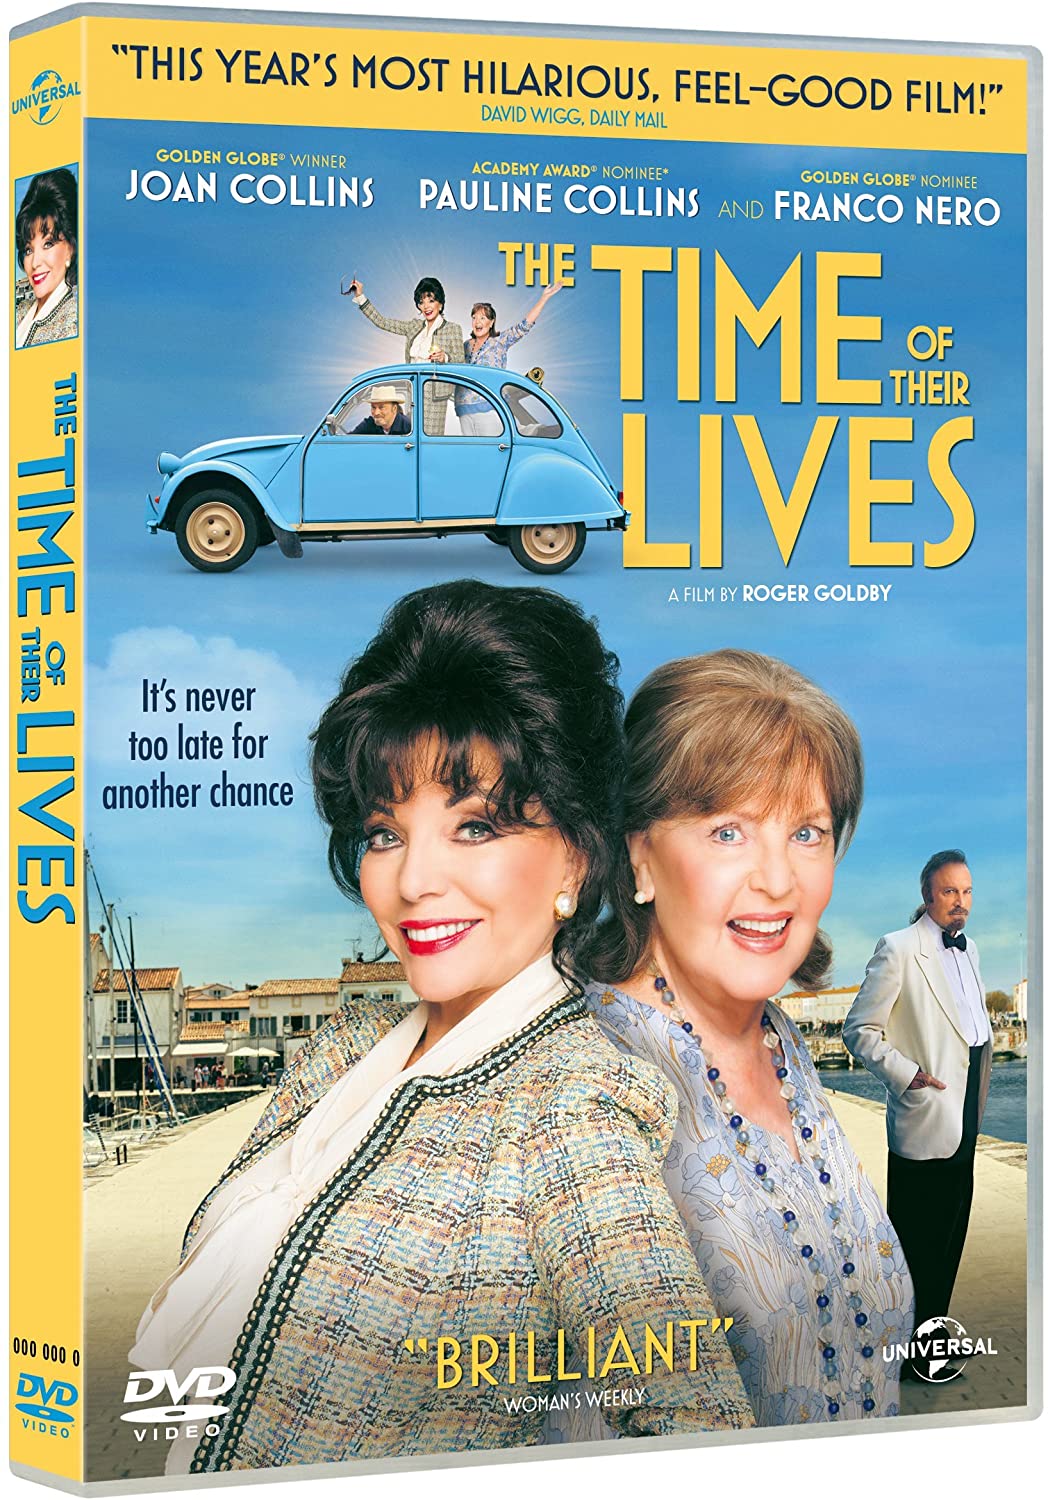 The Time of Their Lives (DVD)